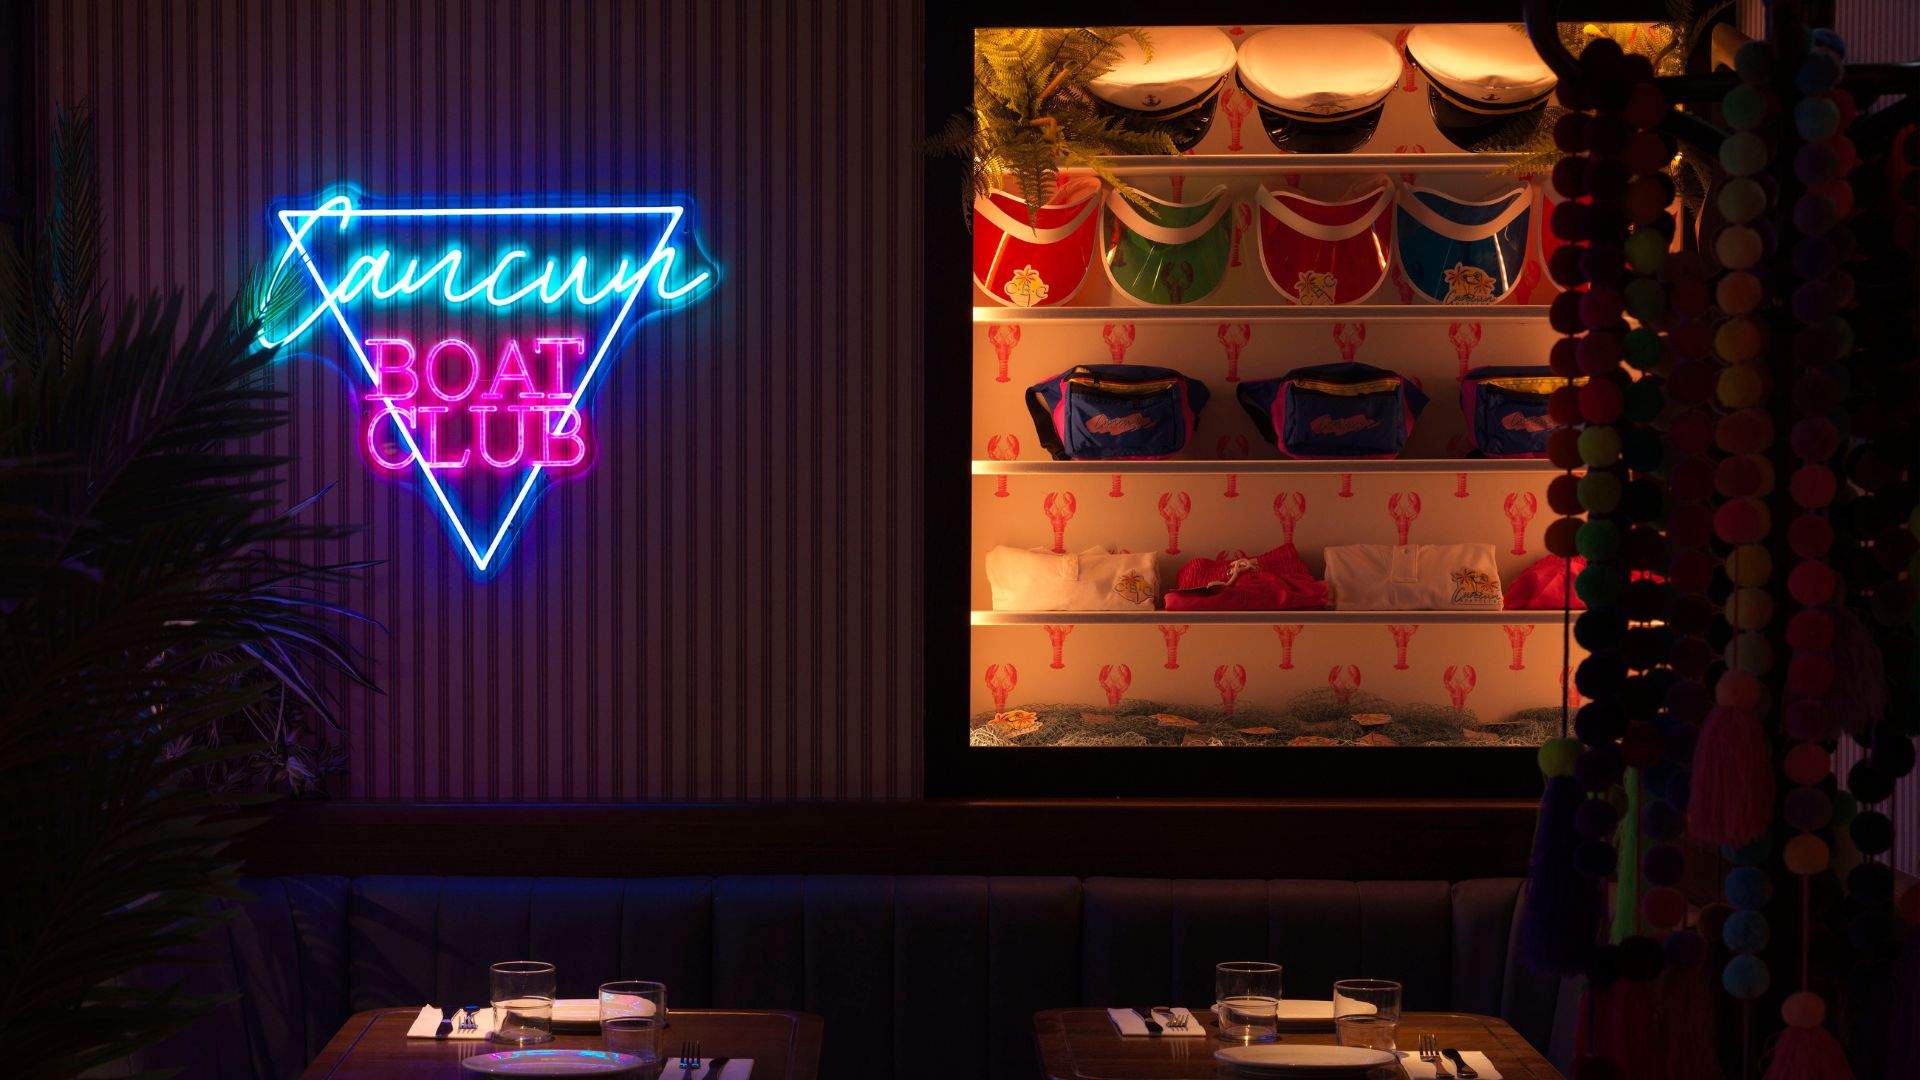 Now Open: Cancun Boat Club Is Quay Quarter's New Mexican Eatery and Margarita Bar Taking Cues from the 80s